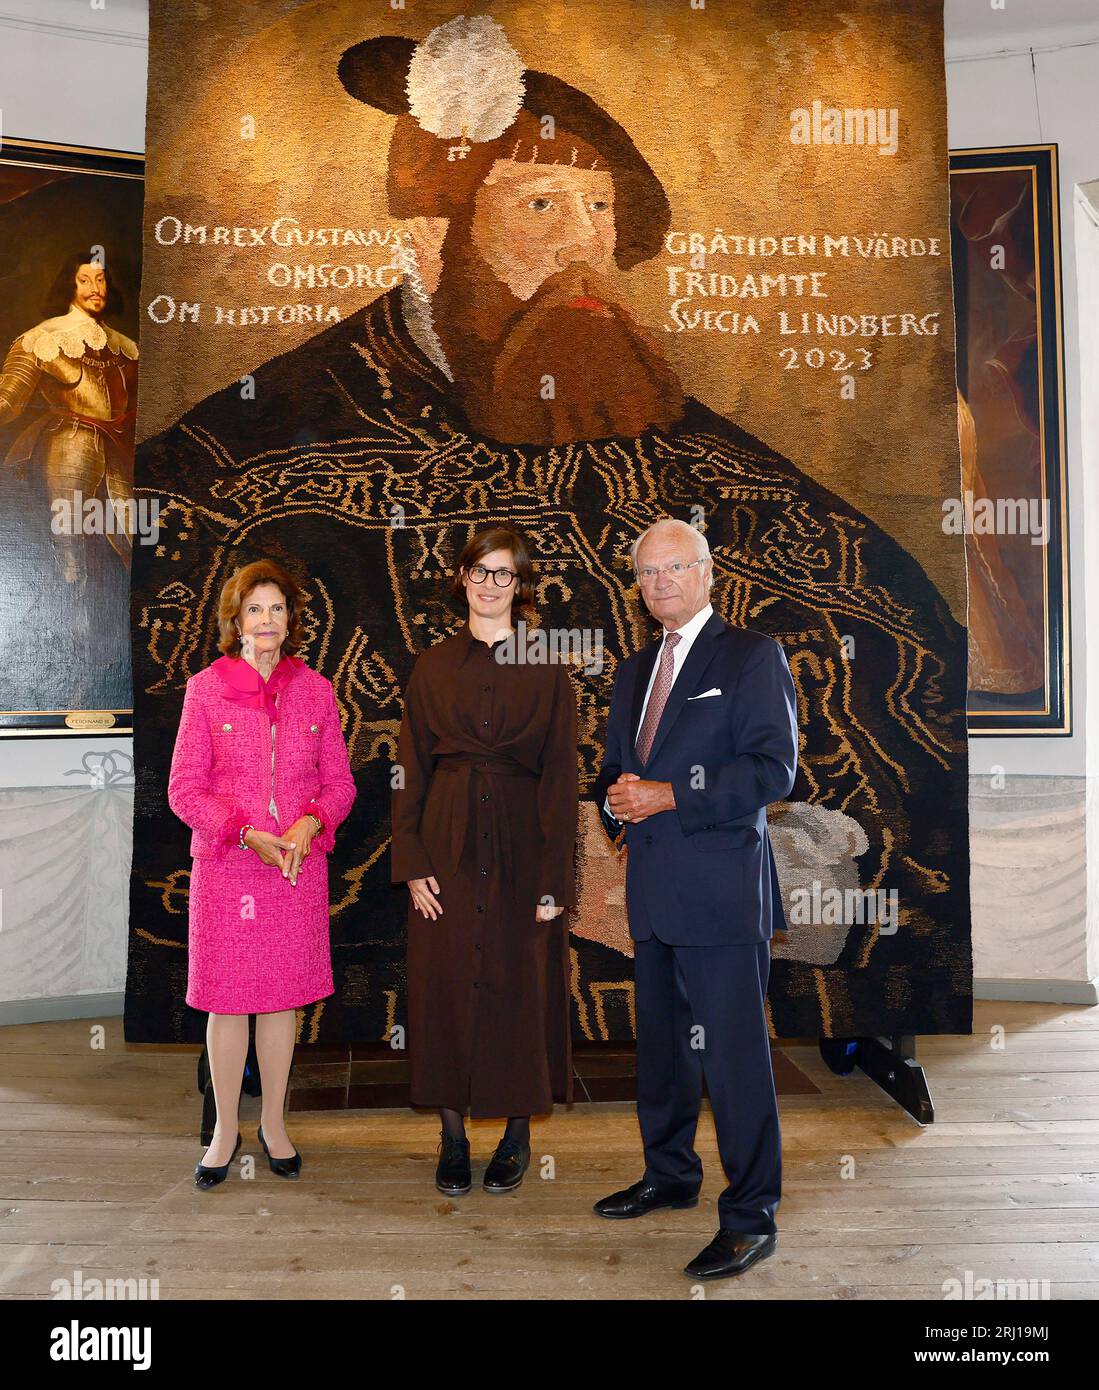 Sweden's King Carl XVI Gustaf and Queen Silvia at a textile weaving depicting Gustav Vasa by the artist Frida Lindberg (centre) at Gripsholm Castle in Mariefred during an  anniversary evening on the occasion of the 500th anniversary of the election of King Gustav Vasa. Mariefred, Sweden, on August 18, 2023. Photo: Stefan Jerrevång/TT code 60160 Stock Photo